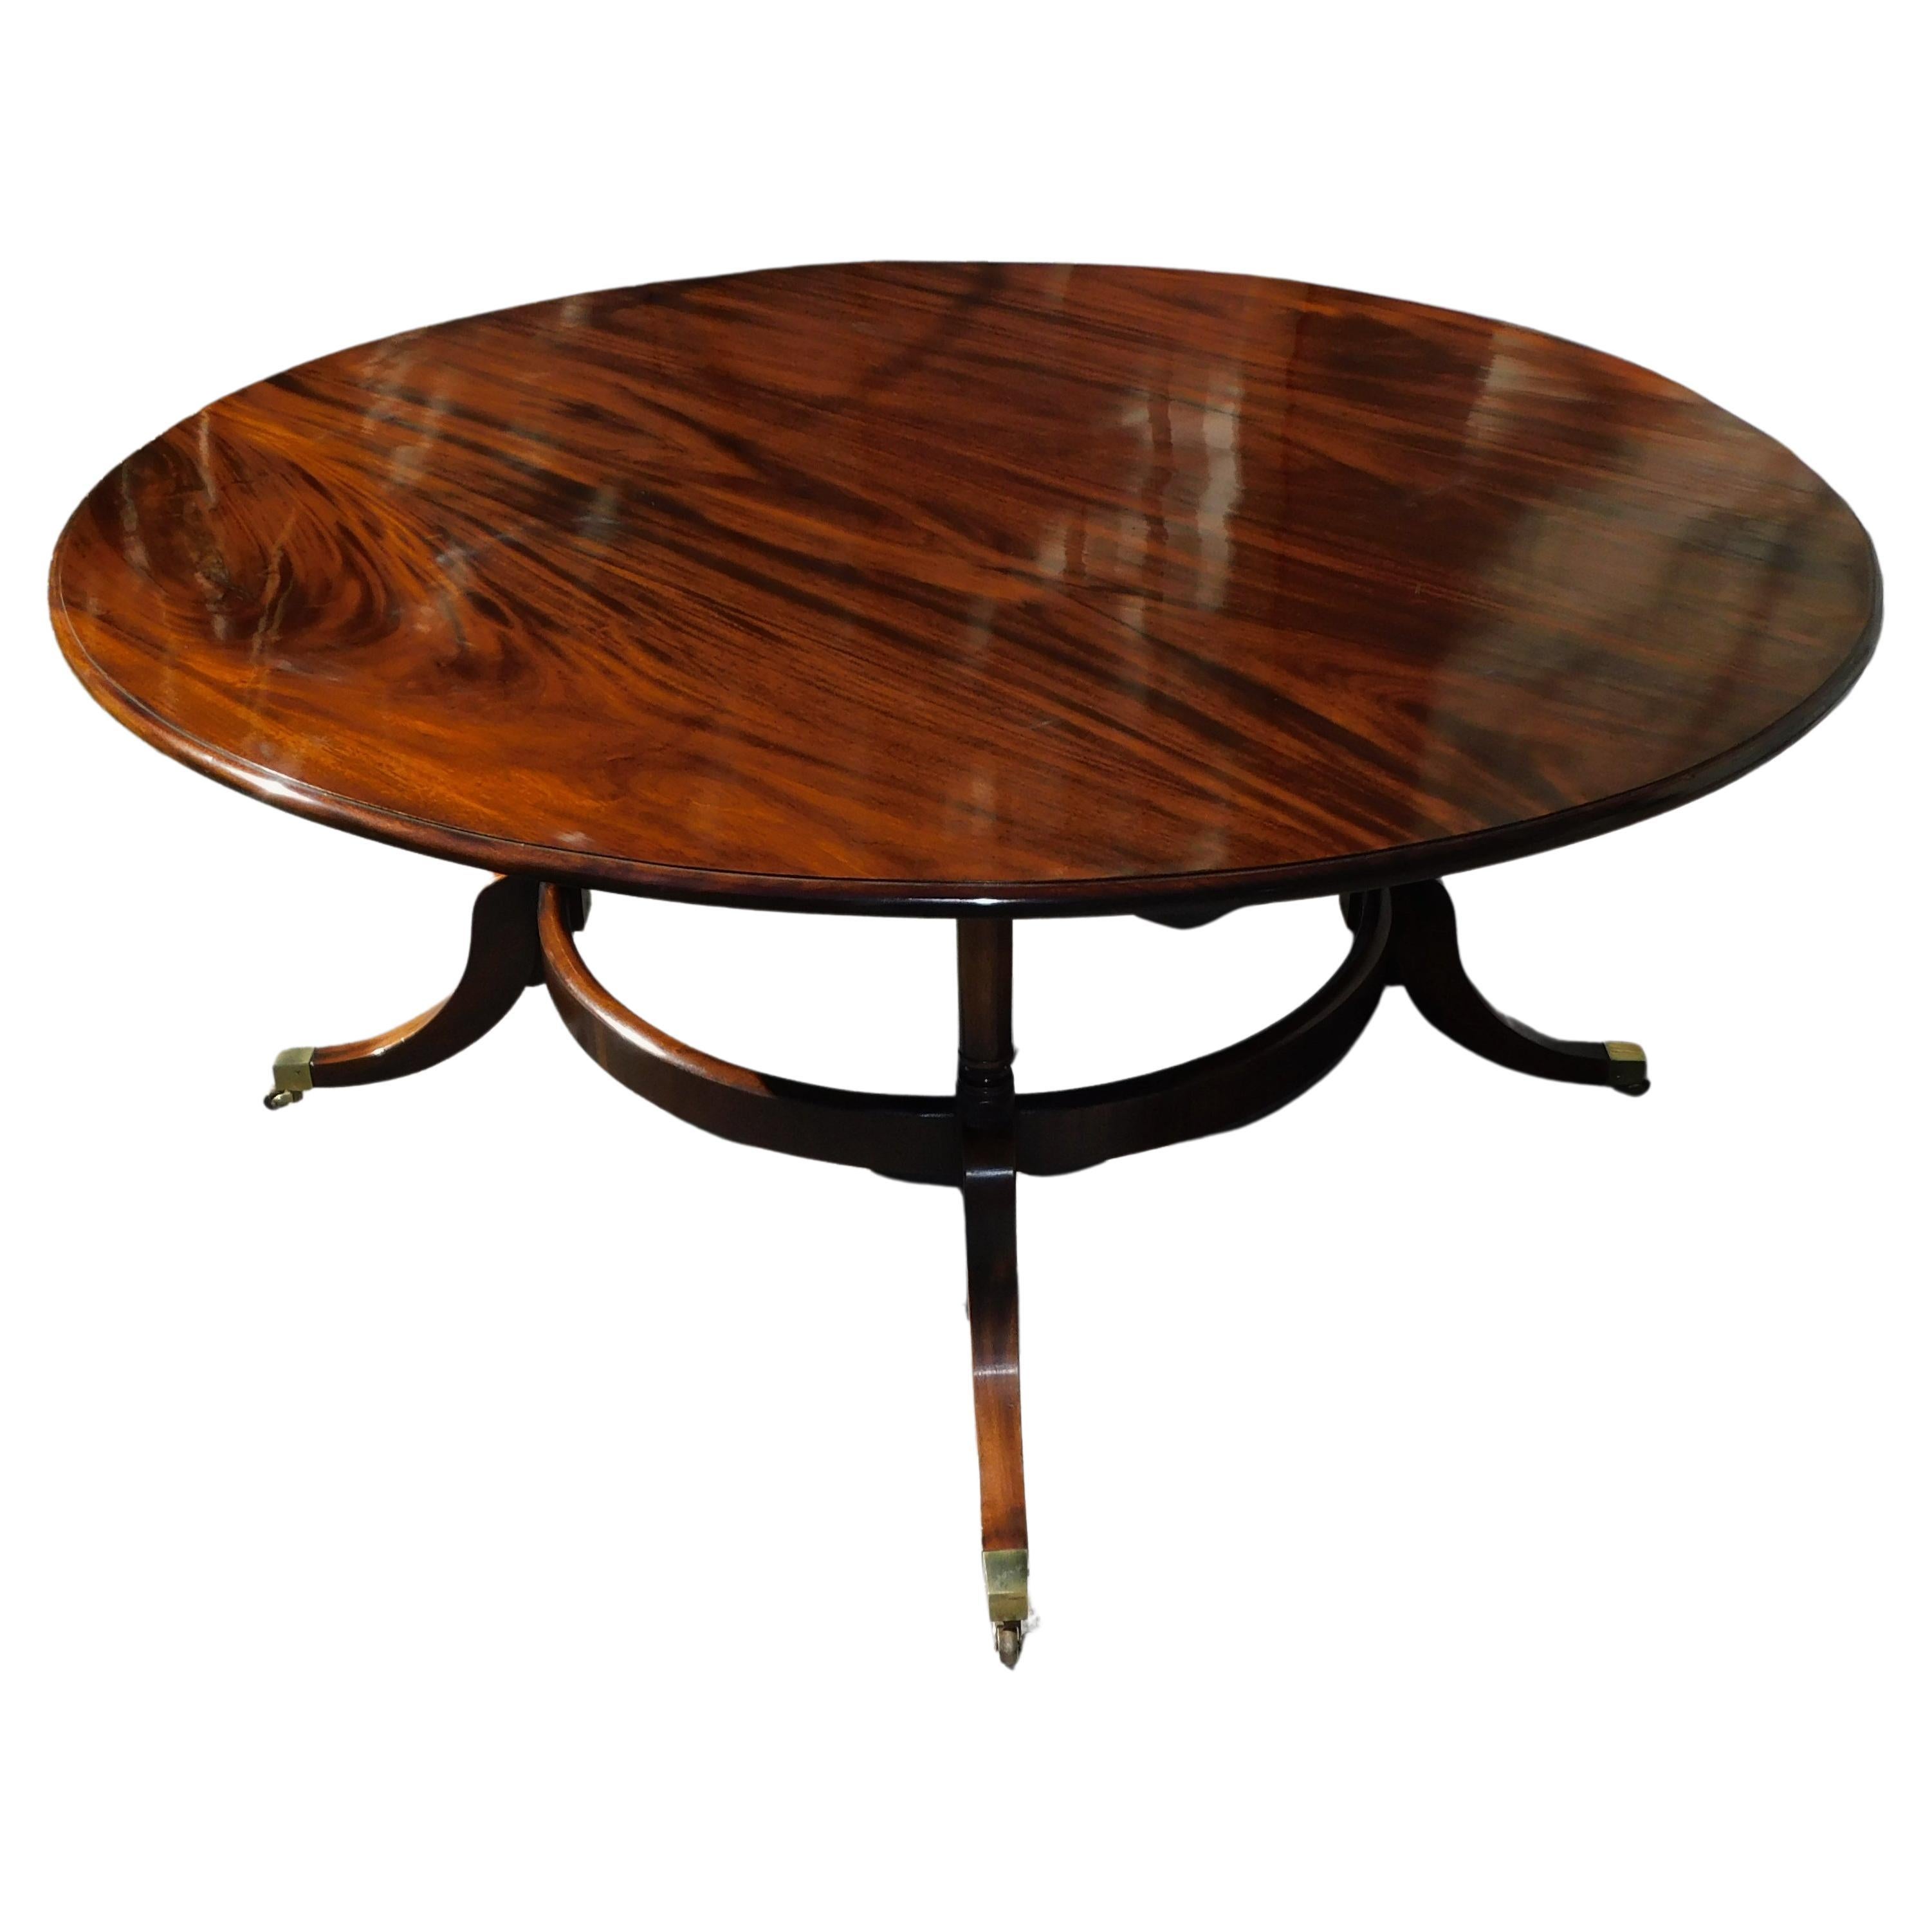 English Regency Mahogany Circular Dining Table with Splayed Legs on Casters 1850 For Sale